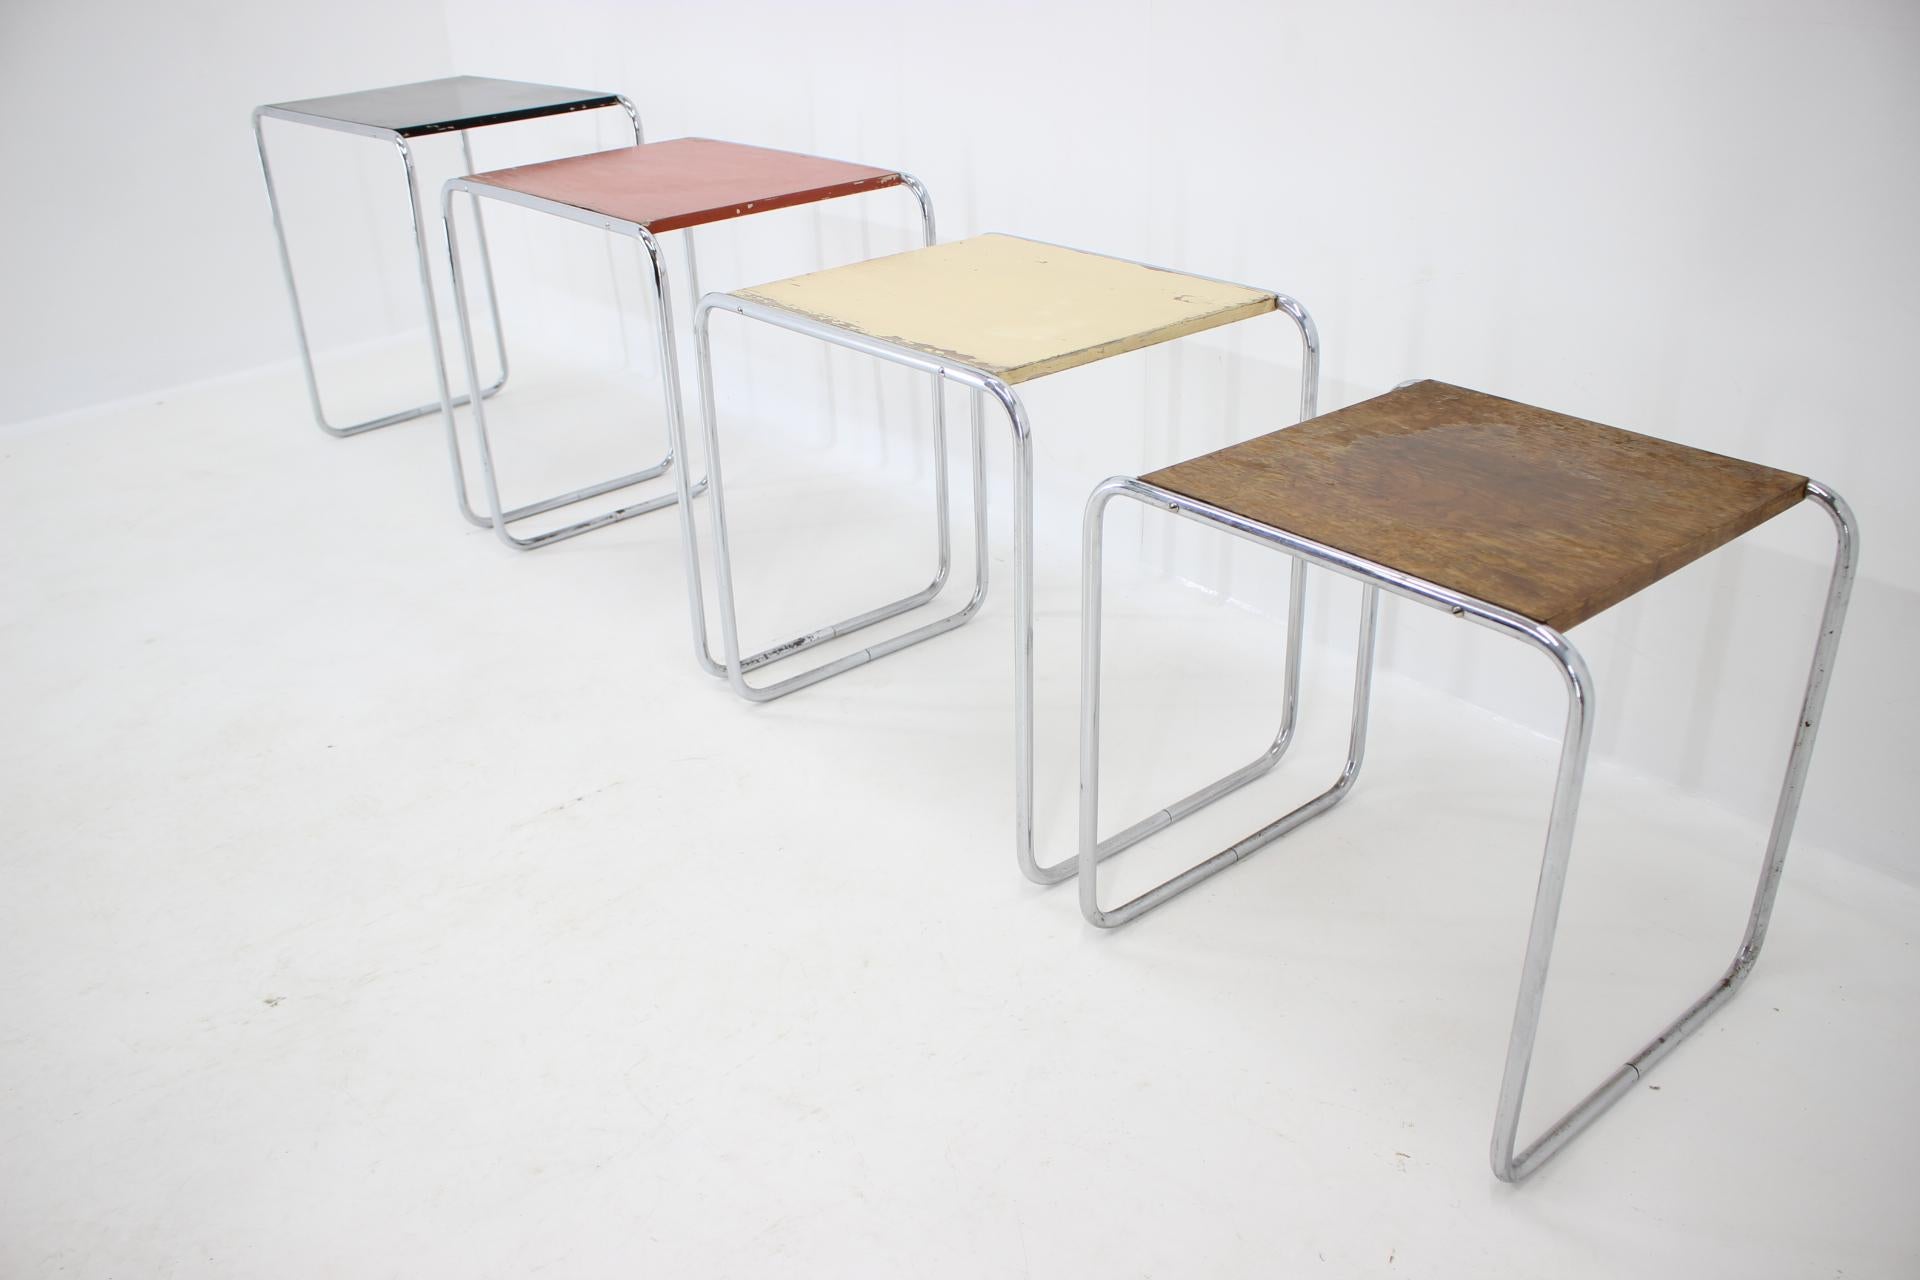 Czech Extremely Rare Bauhaus Colored Nesting Tables B9, Marcel Breuer/ Thonet License